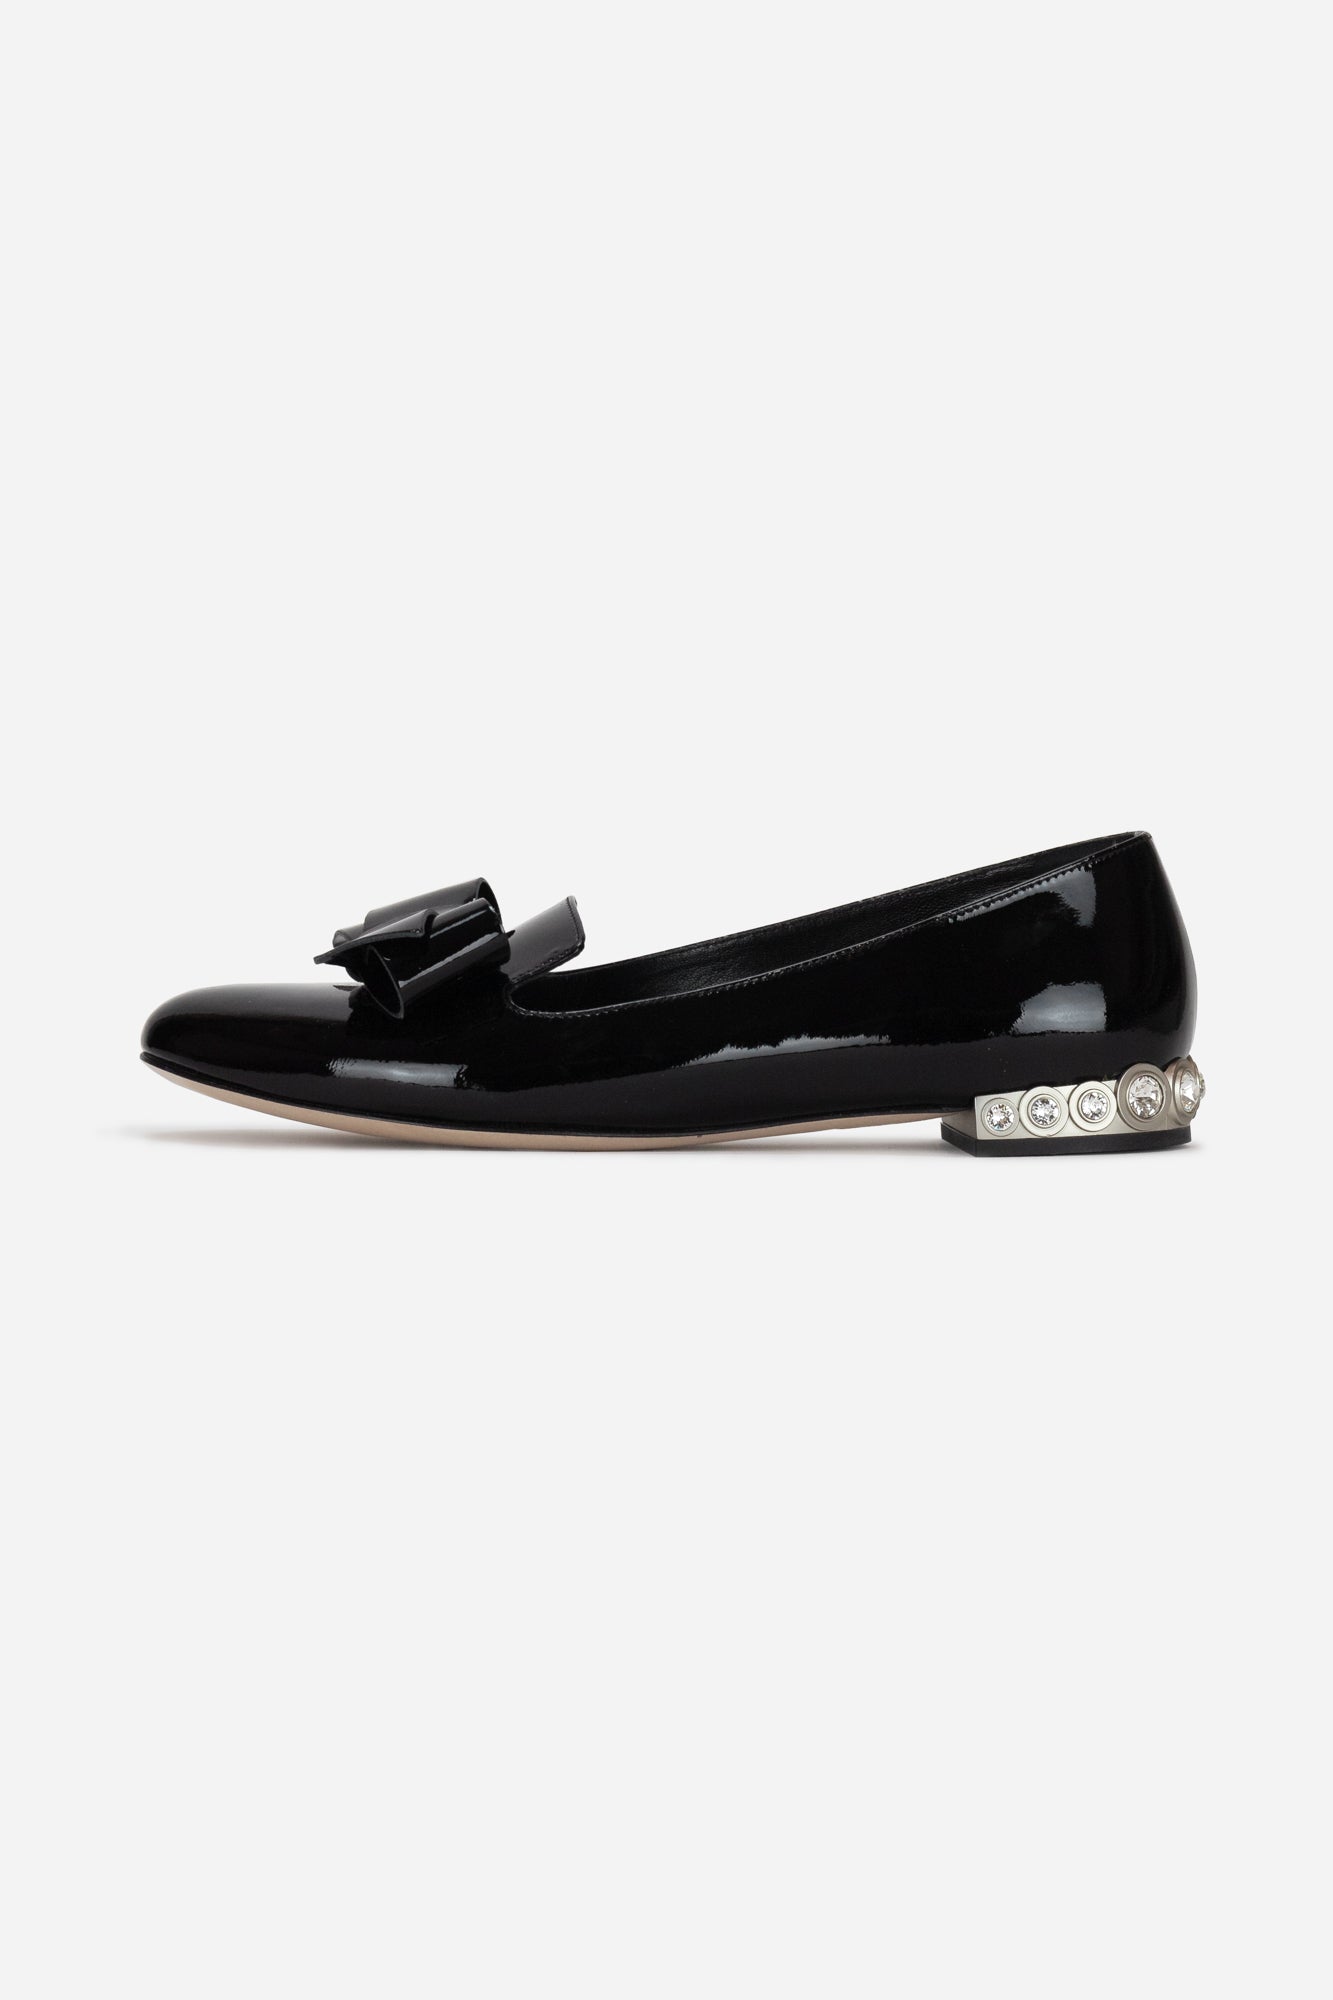 Patent Leather Bow Flats